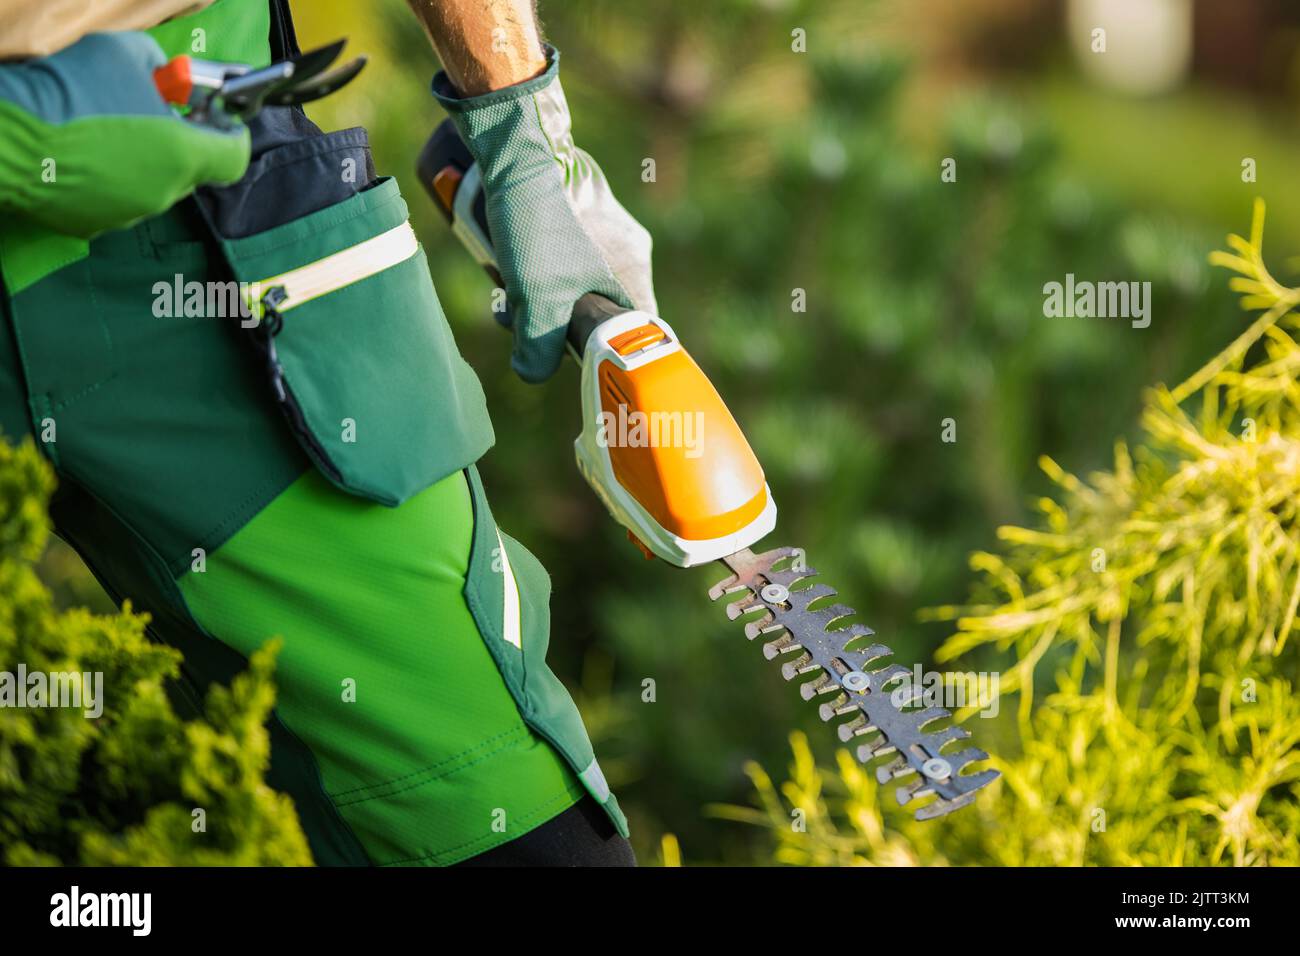 Closeup of Small Cordless Hedge Trimmer in the Hand of Landscape Gardener. Ready for Trimming. Professional Gardening and Landscaping Equipment Theme. Stock Photo